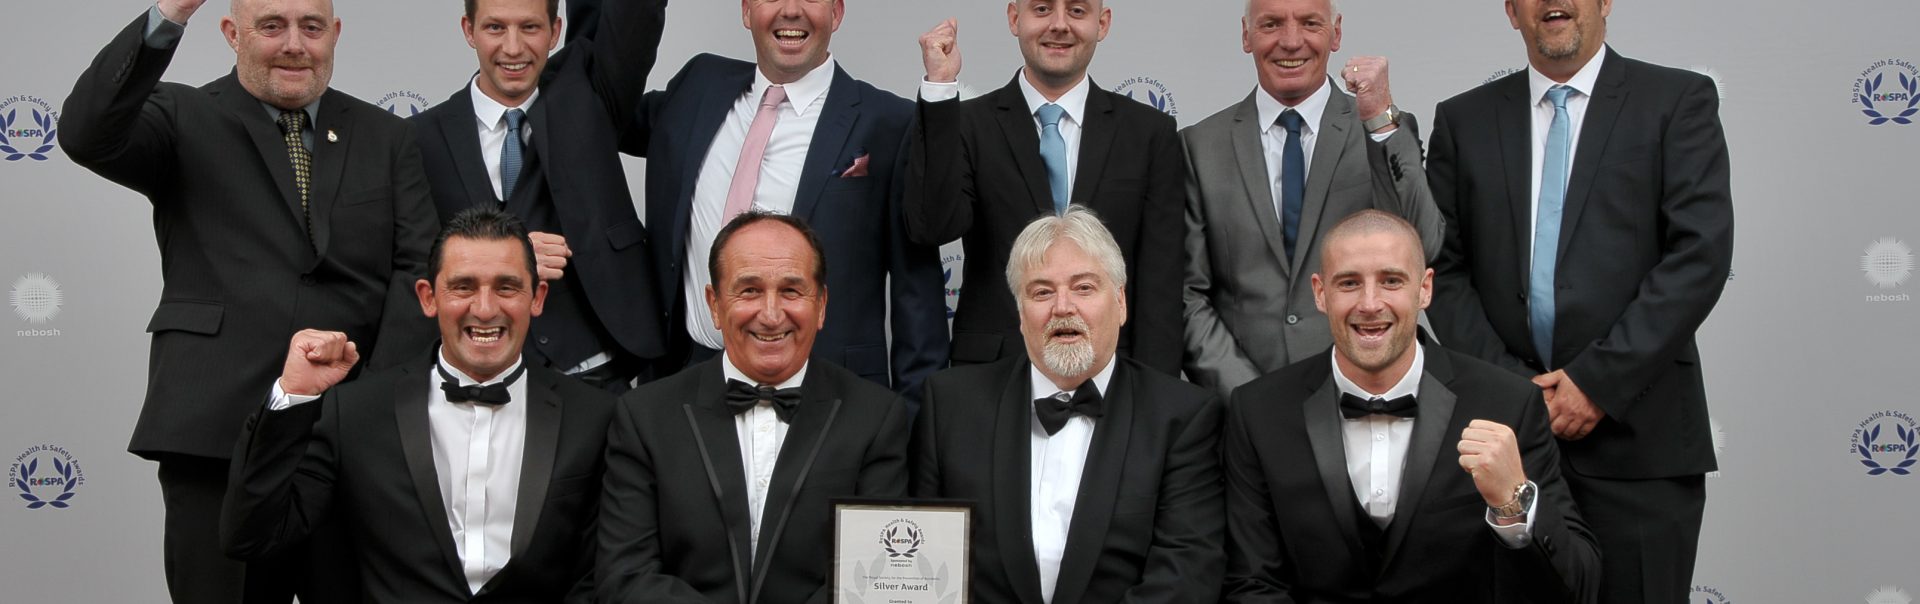 PD Ports health and safety standards commended at prestigious ROSPA awards